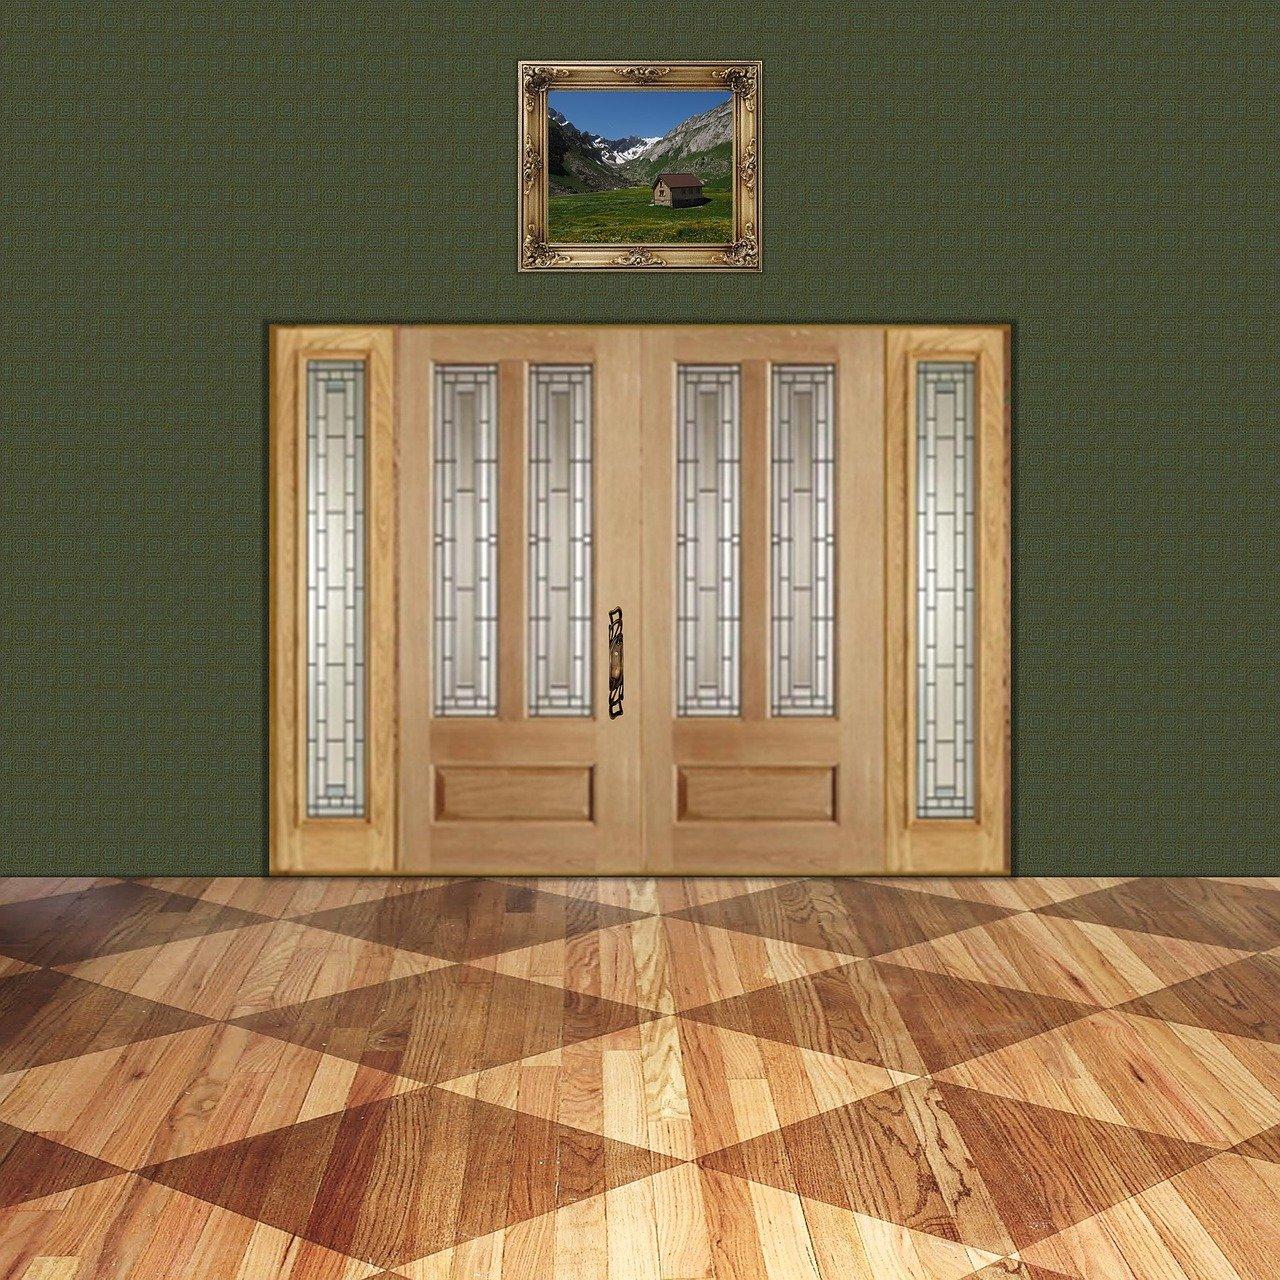 Pavimento in parquet. Foto by Pixabay